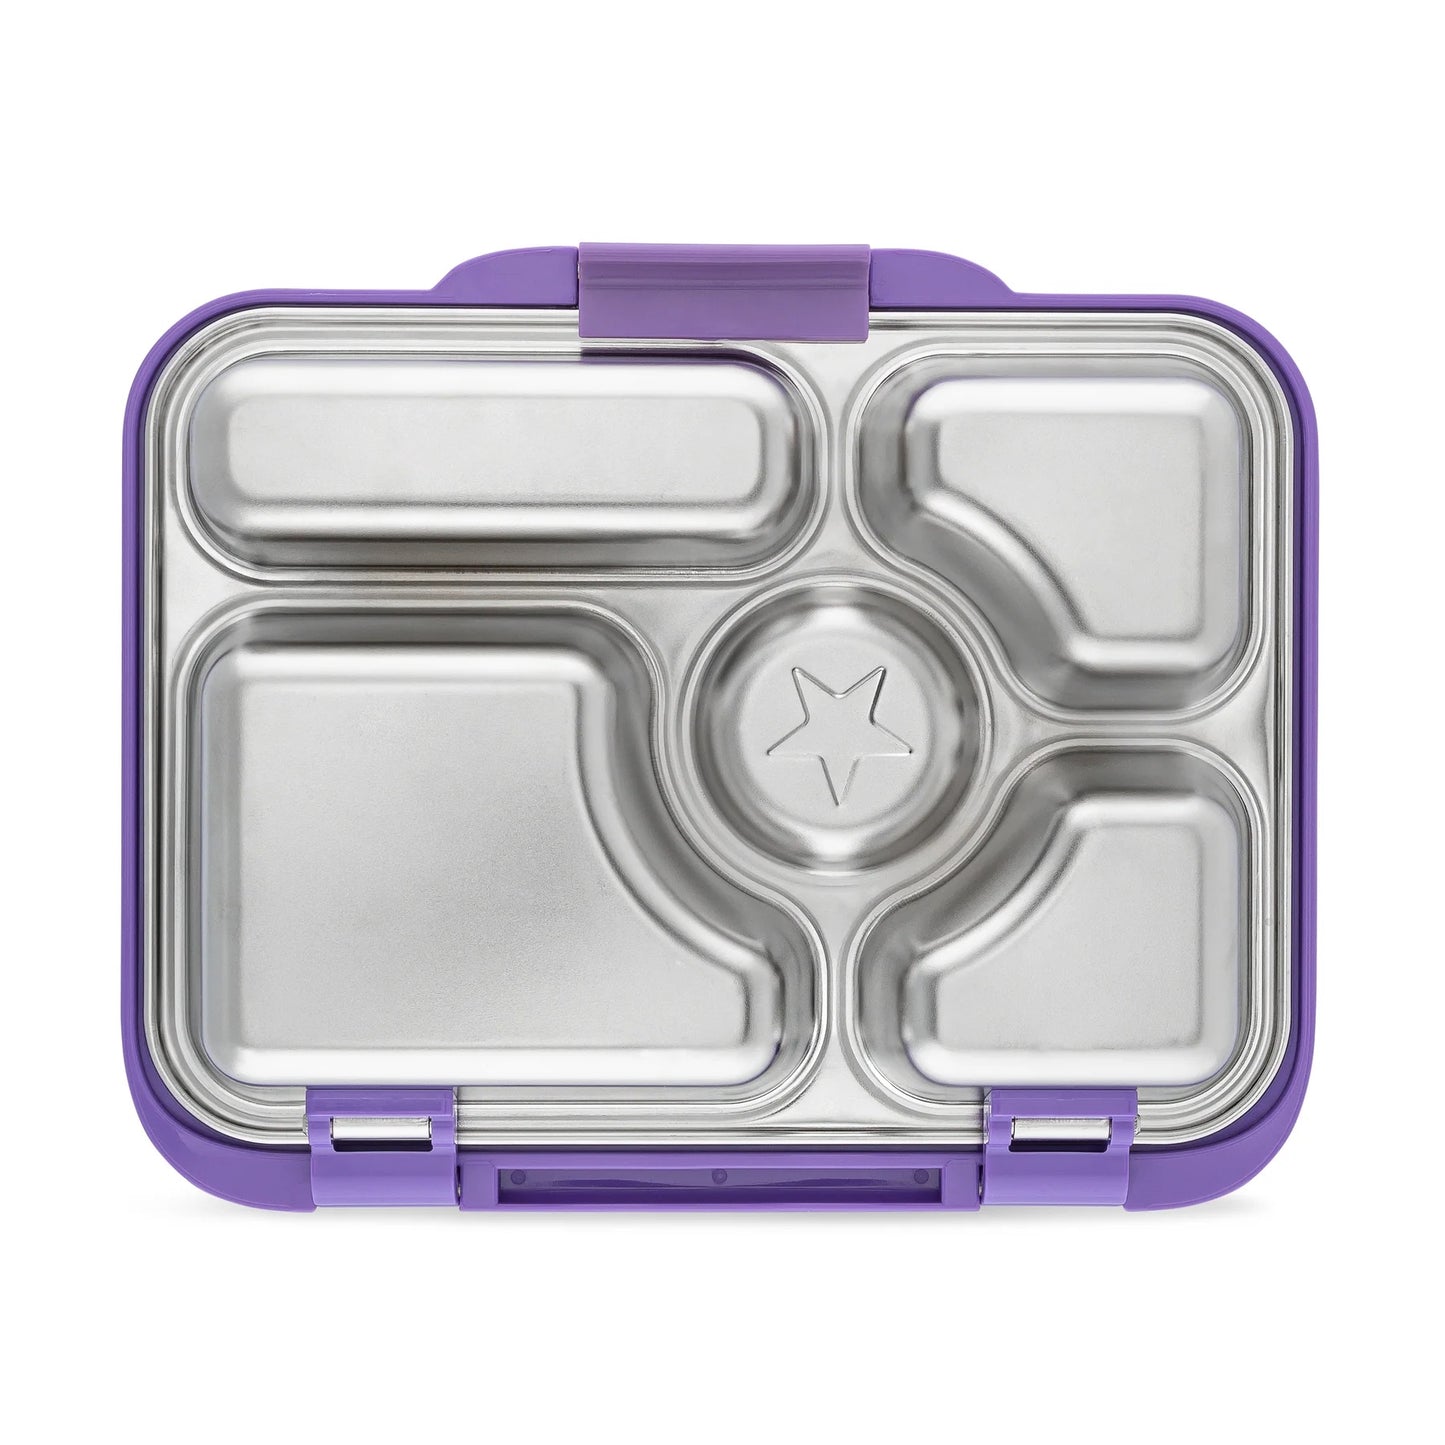 Yumbox - Stainless Steel Bento | 5 Compartments | Leakproof | Remy Lavender